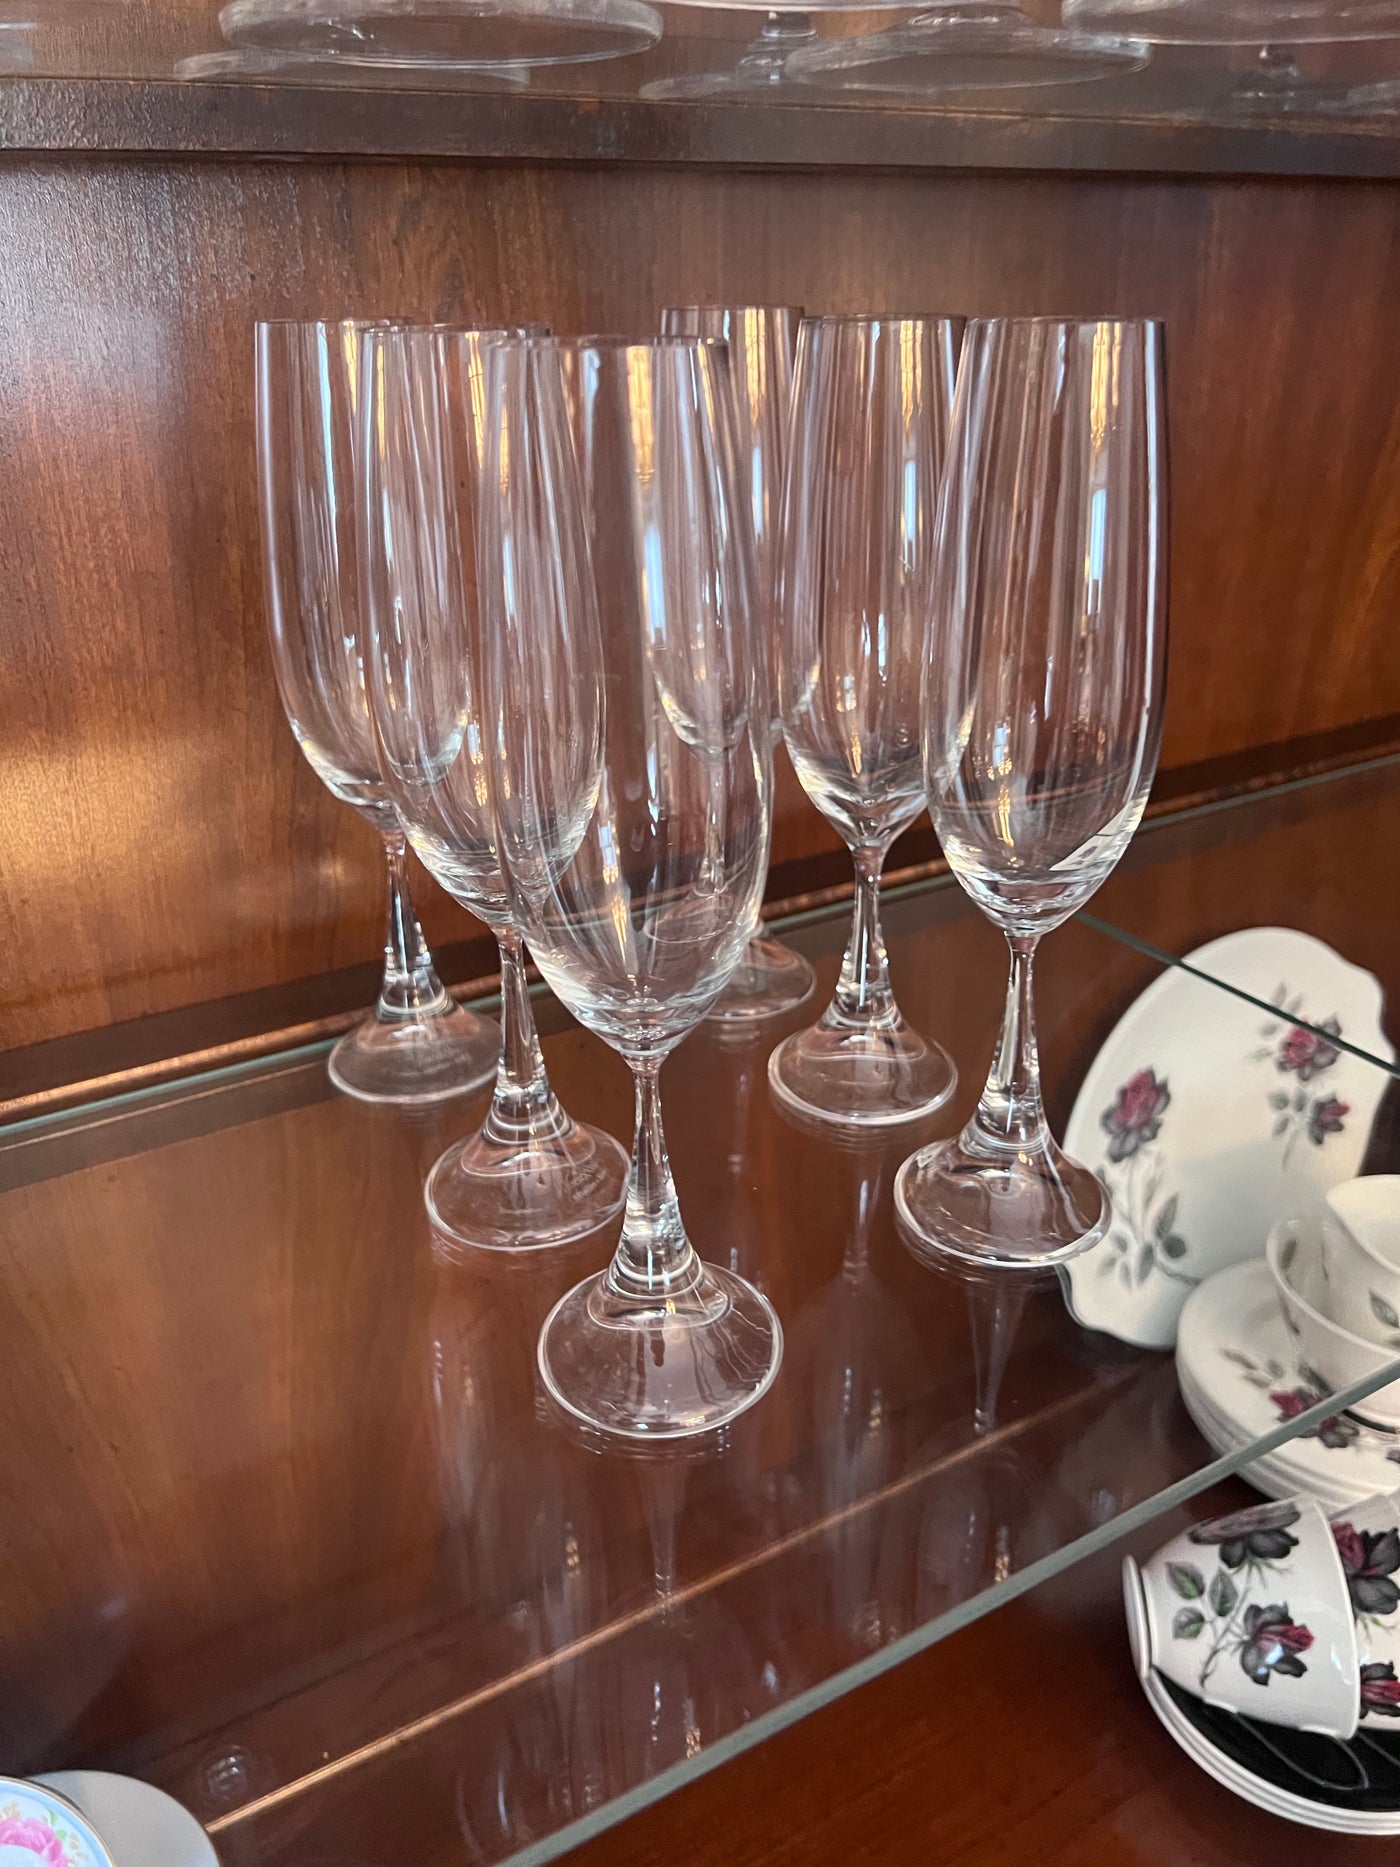 2 Jihlavske Sklarny Bohemia 24% Lead Crystal Champagne Flutes – Sell My  Stuff Canada - Canada's Content and Estate Sale Specialists